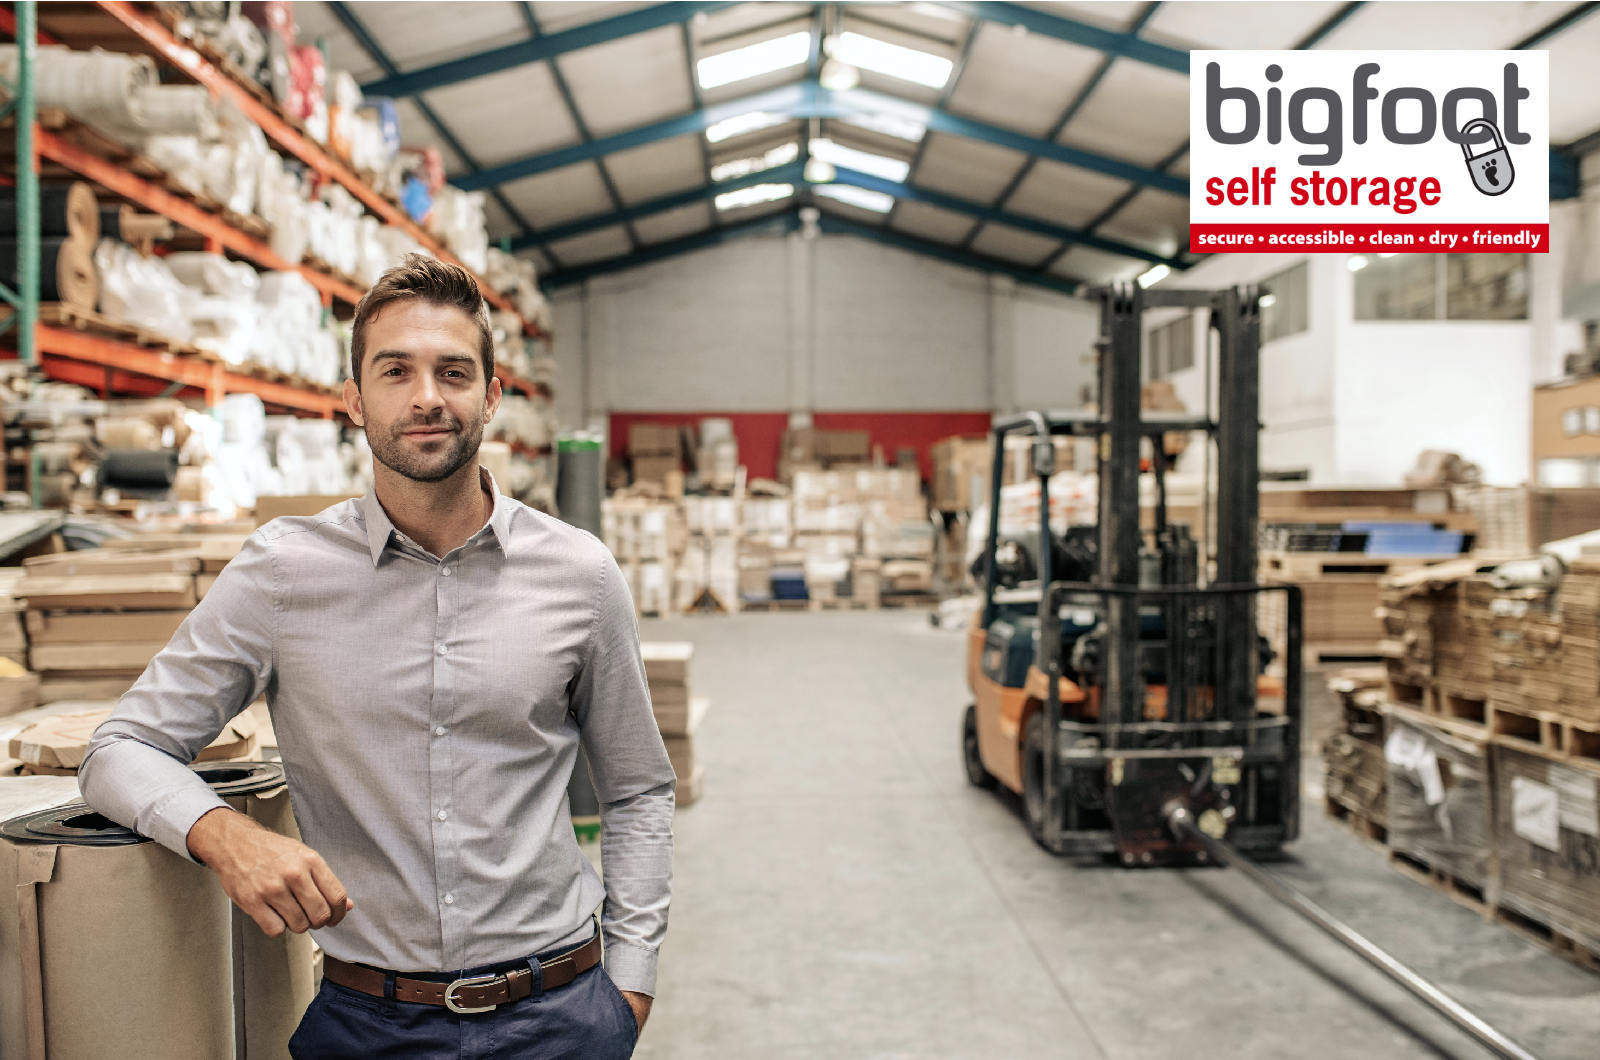 Reasons to use business self storage for your stock